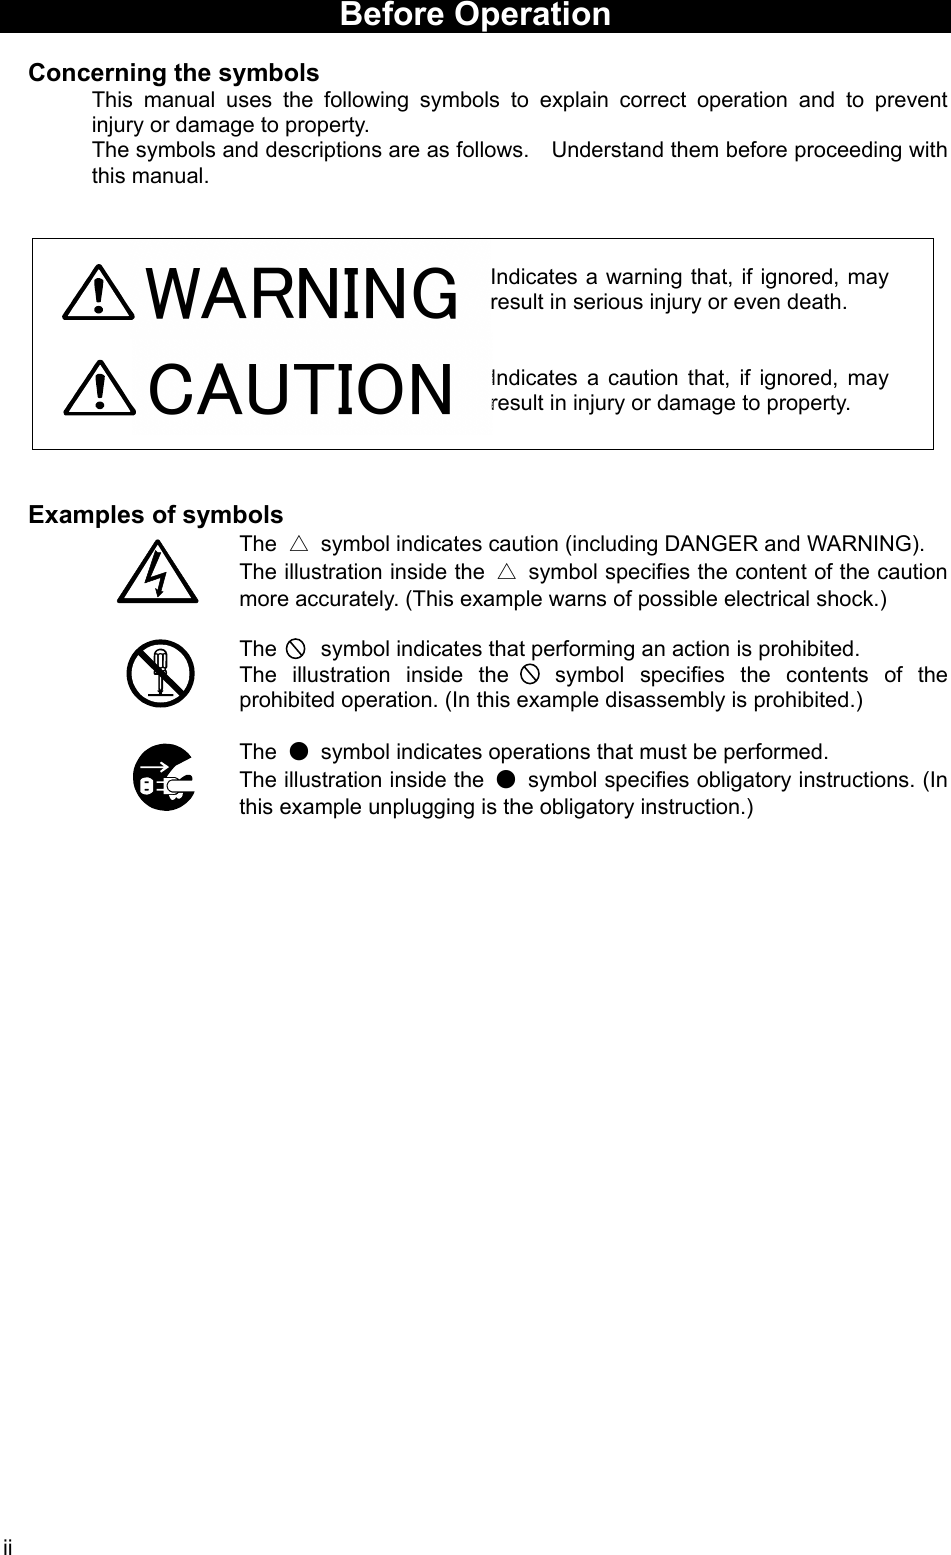 ii WARNING  Before Operation    Concerning the symbols This manual uses the following symbols to explain correct operation and to prevent injury or damage to property. The symbols and descriptions are as follows.    Understand them before proceeding with this manual.    Indicates a warning that, if ignored, may result in serious injury or even death.   Indicates a caution that, if ignored, may result in injury or damage to property.     Examples of symbols The  △  symbol indicates caution (including DANGER and WARNING). The illustration inside the  △ symbol specifies the content of the caution more accurately. (This example warns of possible electrical shock.)  The    symbol indicates that performing an action is prohibited. The illustration inside the   symbol specifies the contents of the prohibited operation. (In this example disassembly is prohibited.)  The  ●  symbol indicates operations that must be performed. The illustration inside the  ●  symbol specifies obligatory instructions. (In this example unplugging is the obligatory instruction.)    CAUTION 